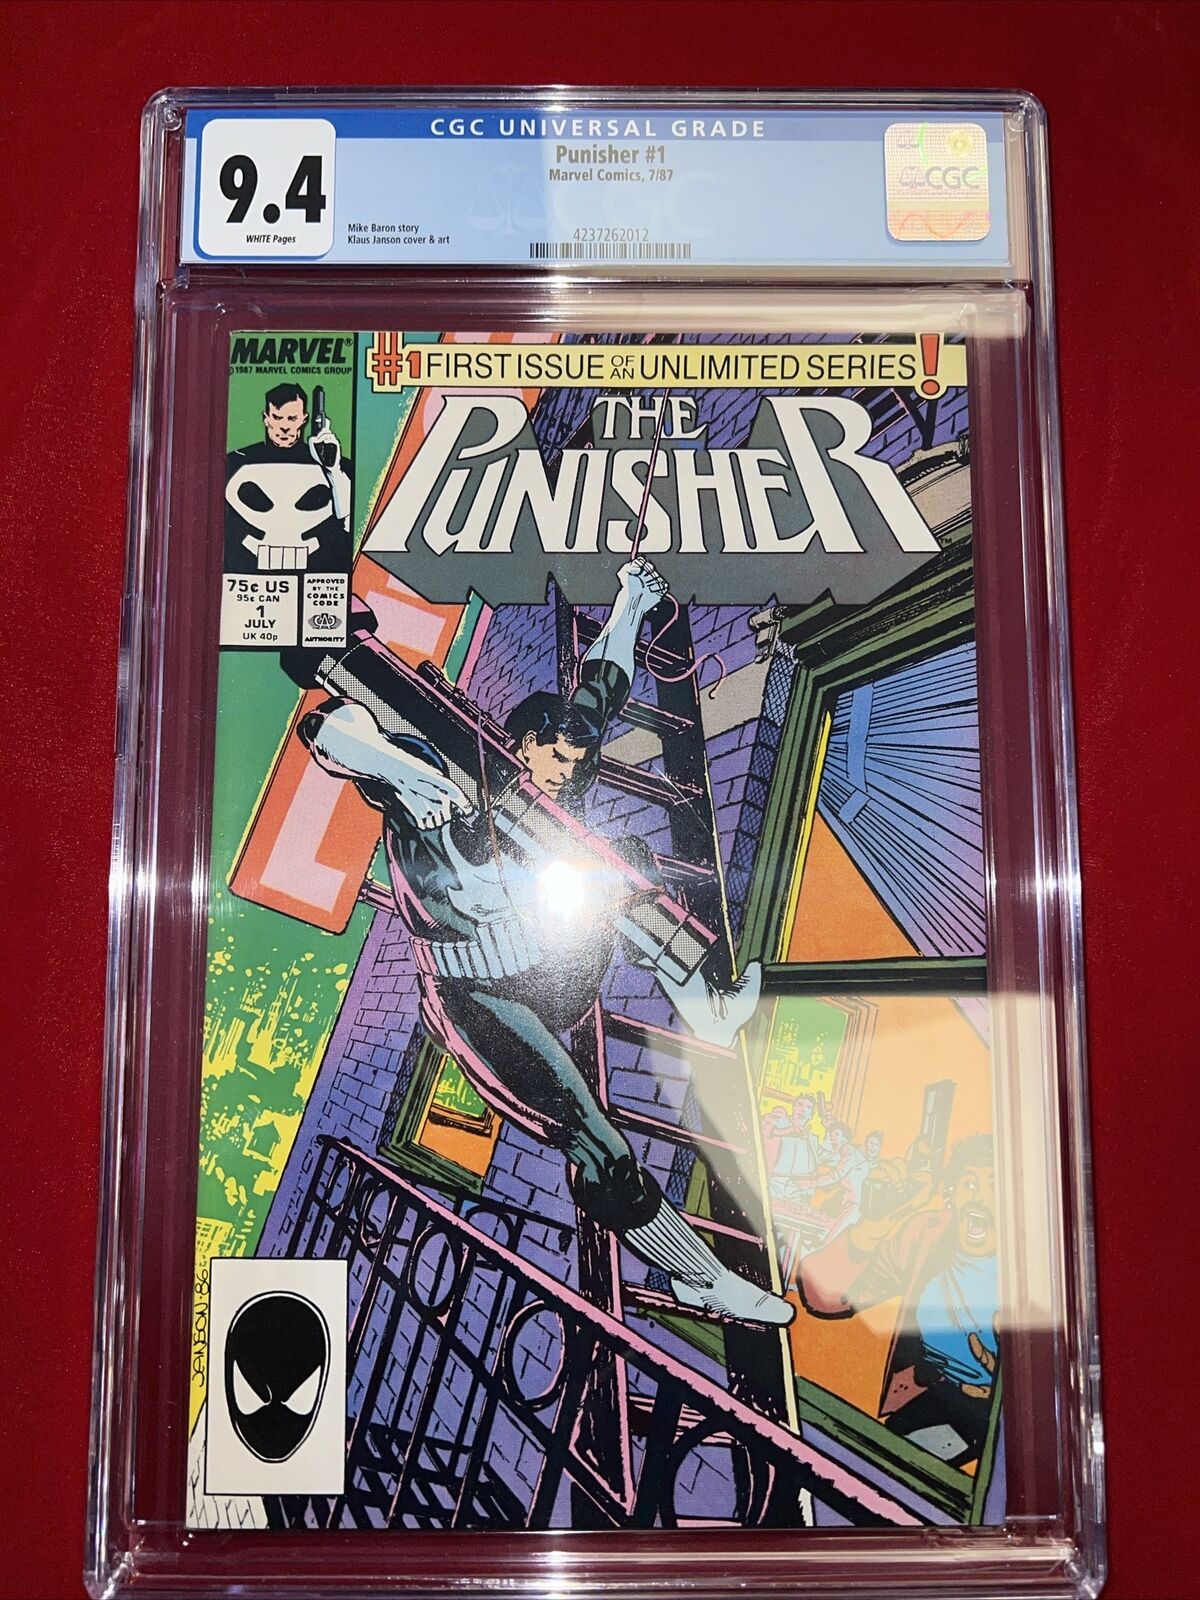 THE PUNISHER #1 CGC 9.4 White Pages Marvel Comics 1987 comic book